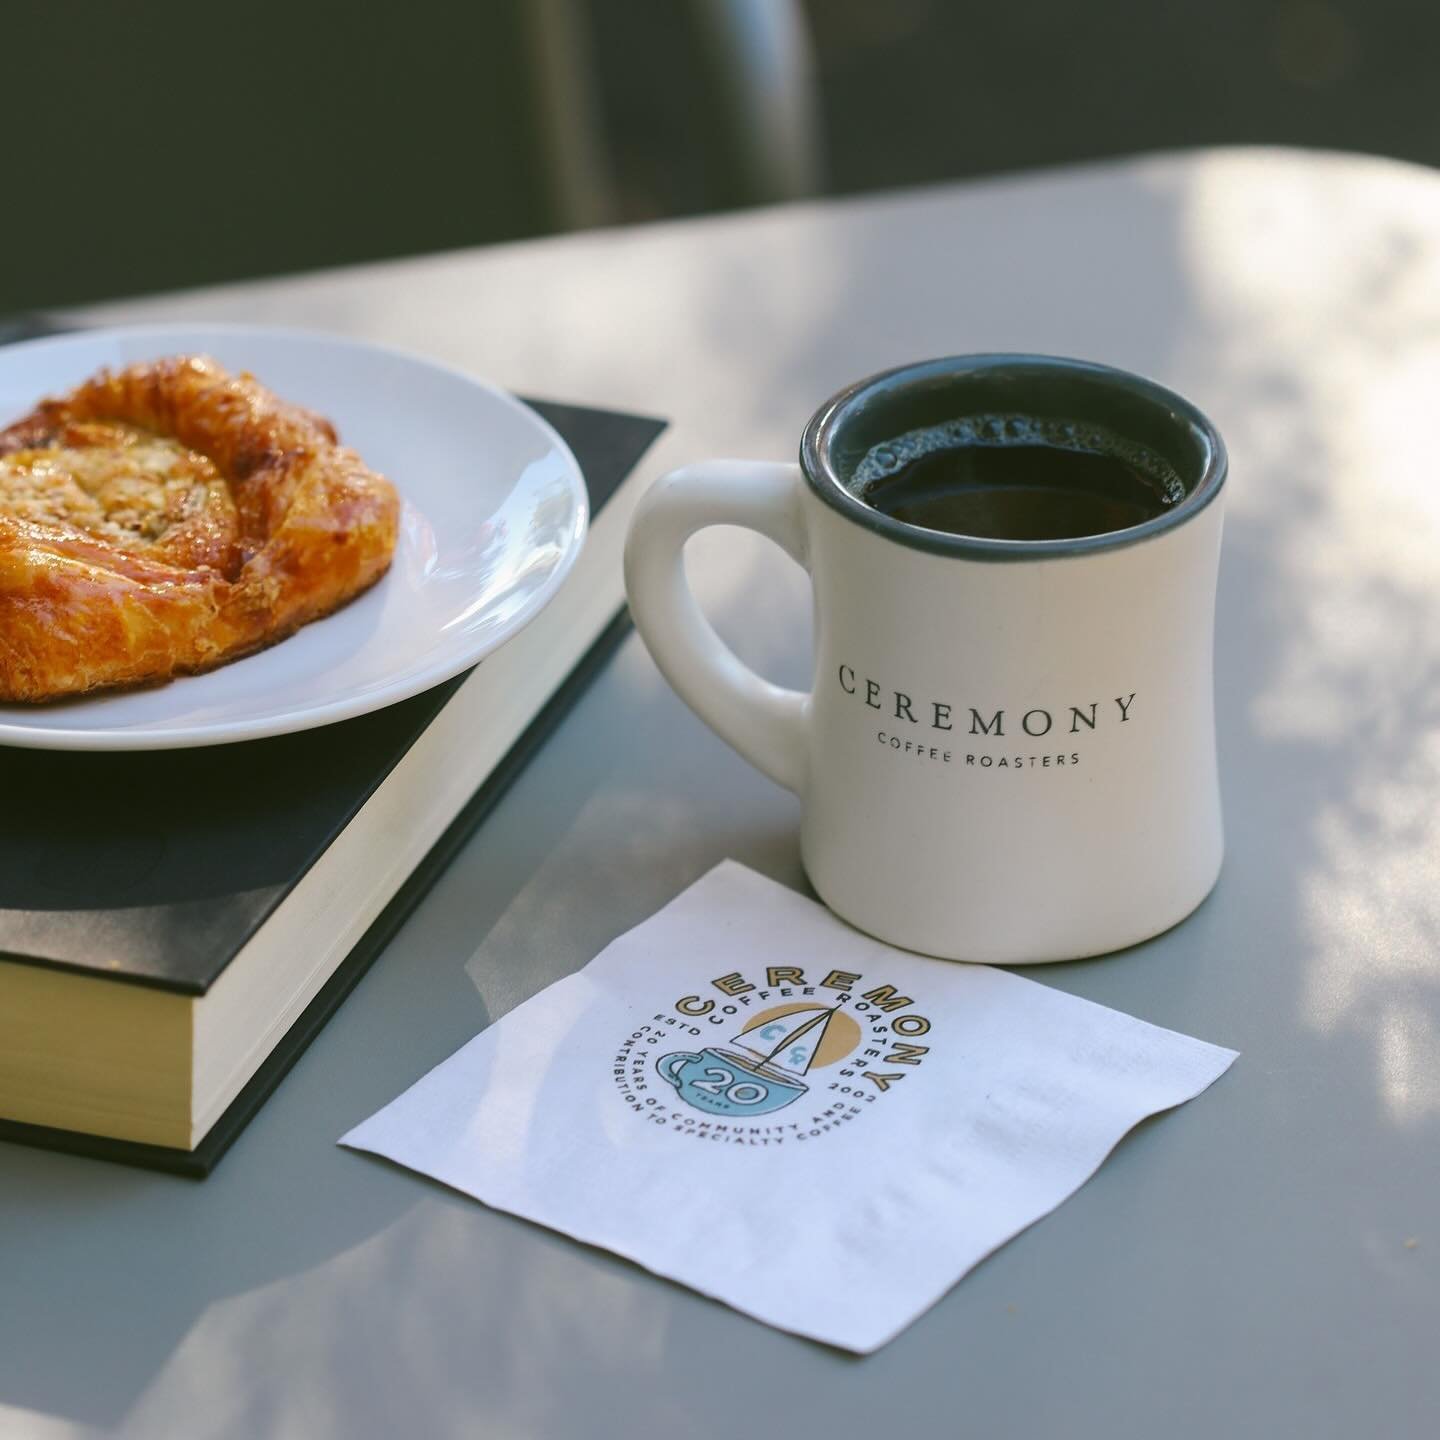 Take a minute for yourself at @ceremonycoffee ☕️

Whether you are someone who loves a classic drip coffee or someone who loves to treat yourself to a more unique, seasonal special @ceremonycoffee is the place to unwind this weekend.

Don&rsquo;t miss